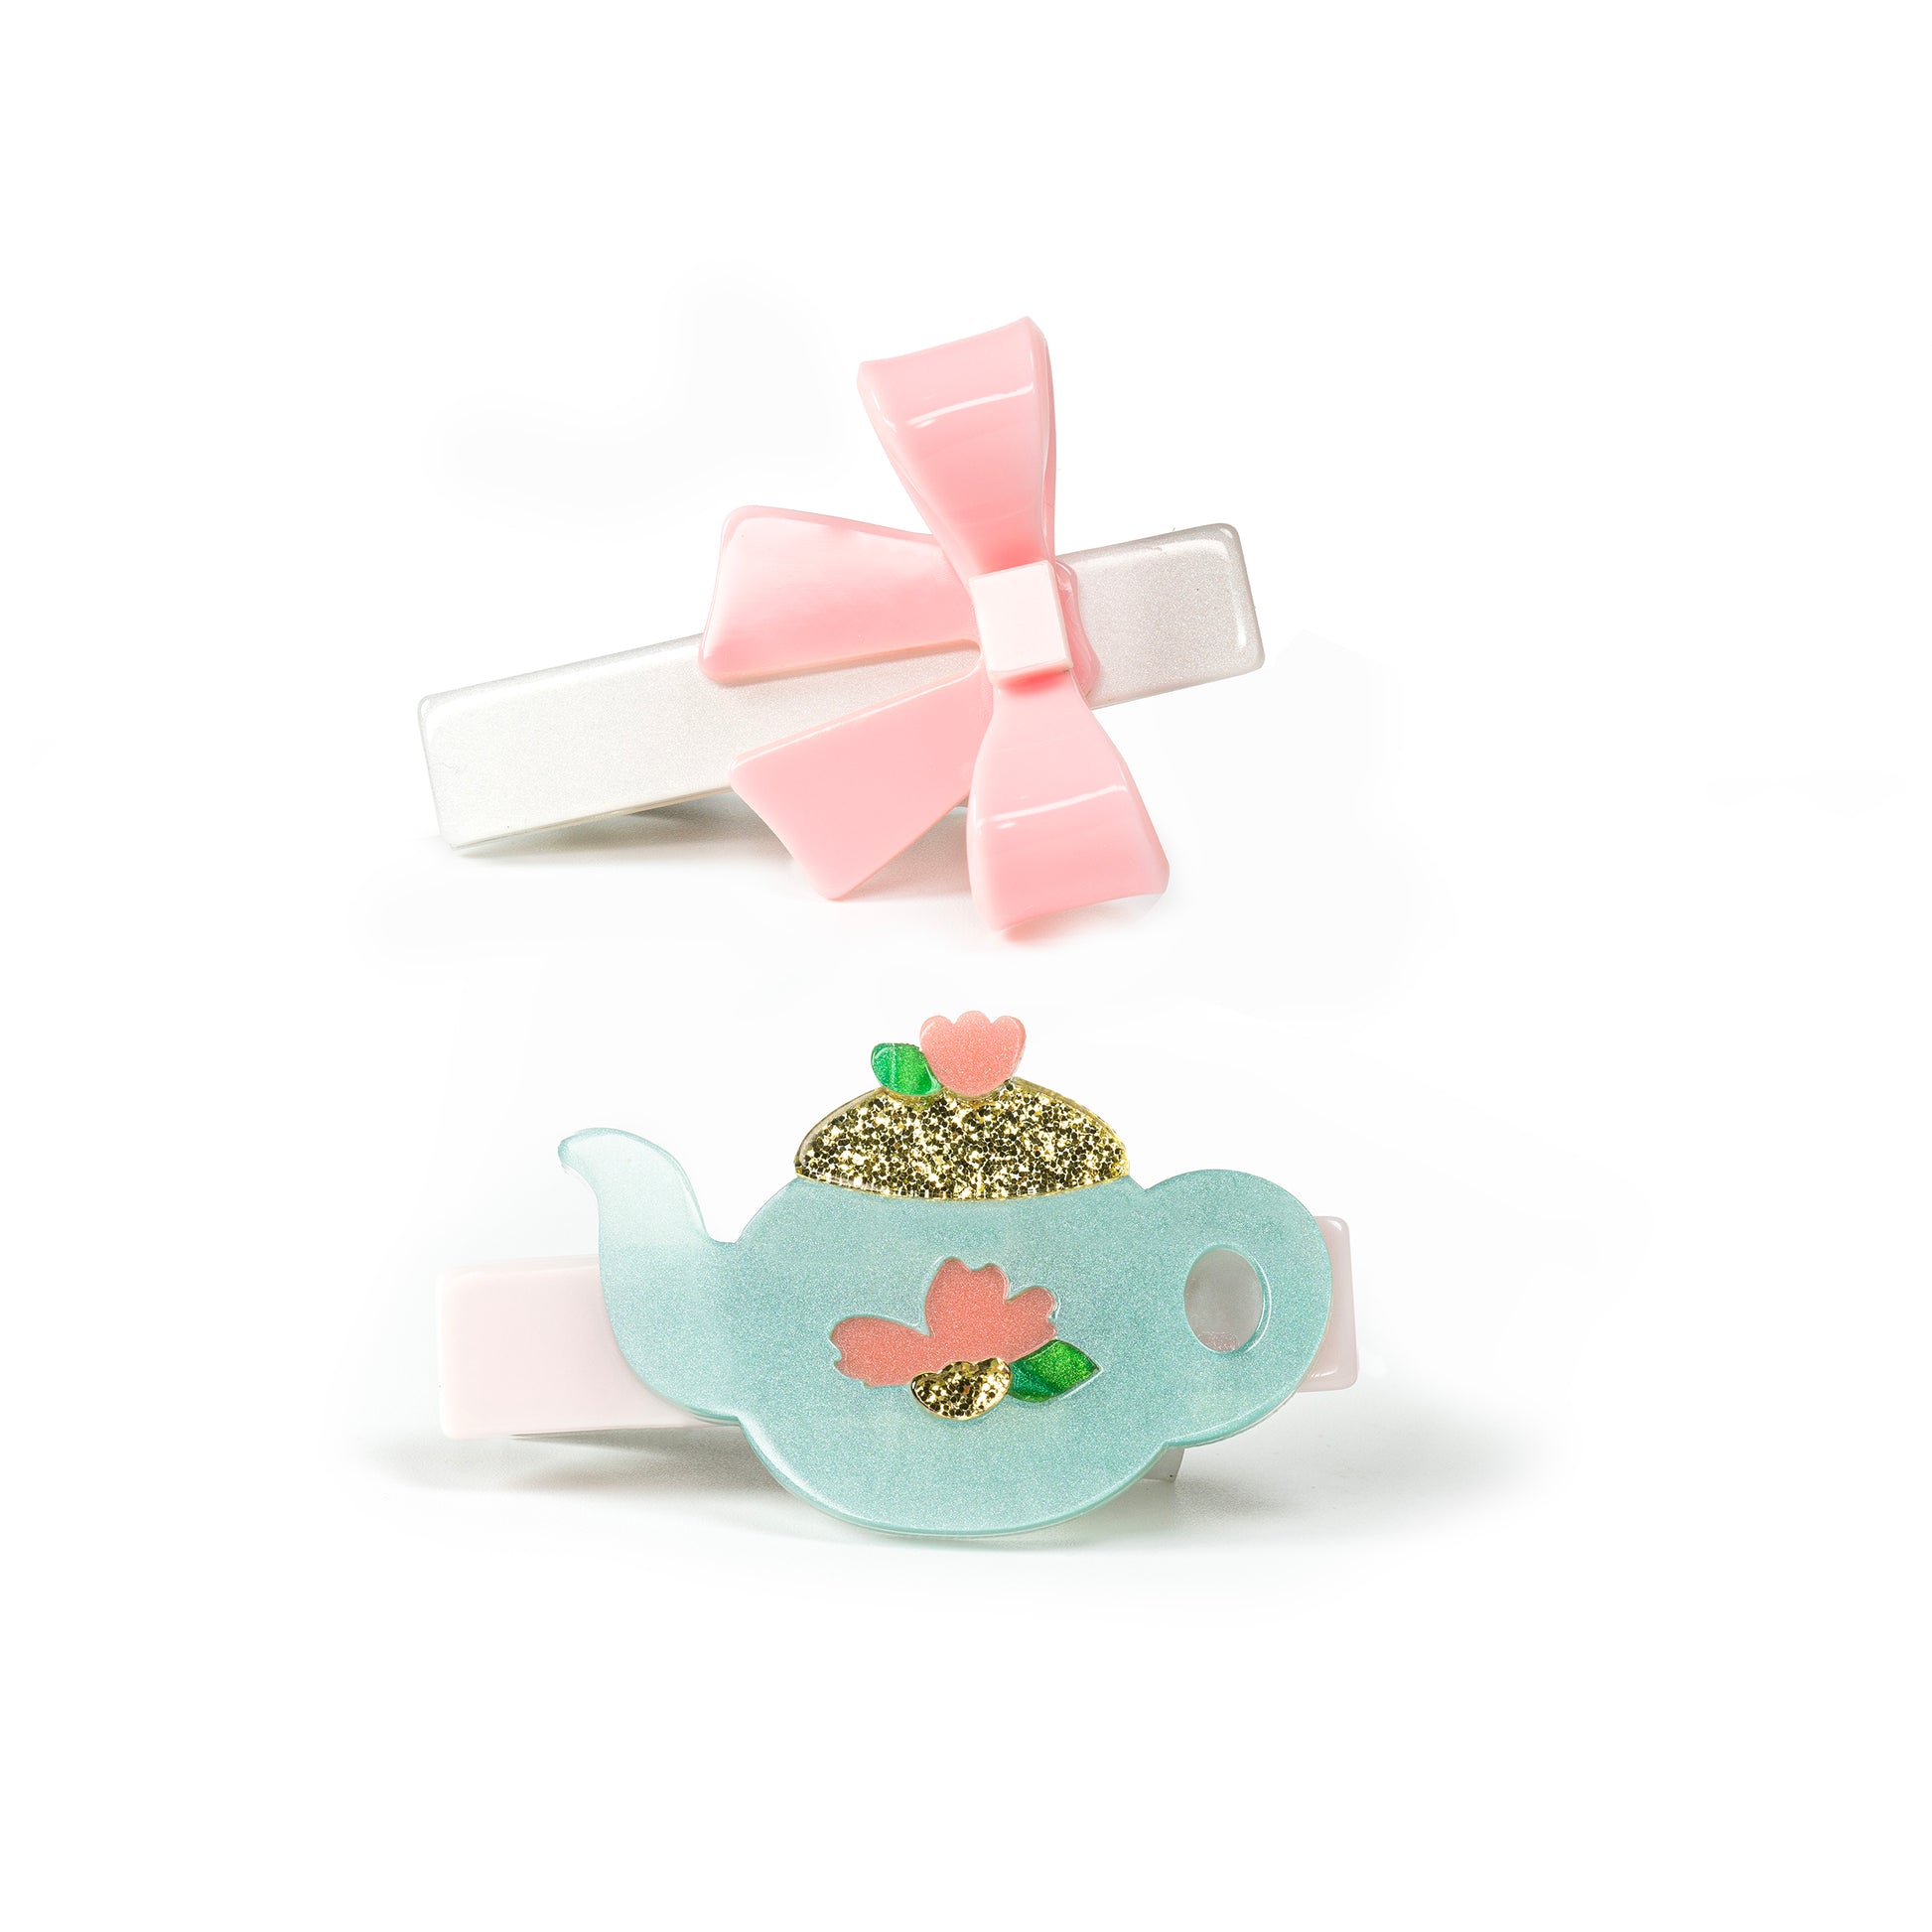 Pair of hair clips. One is adorned with a light pink bow and the other one with a glittery gold and mint teapot.